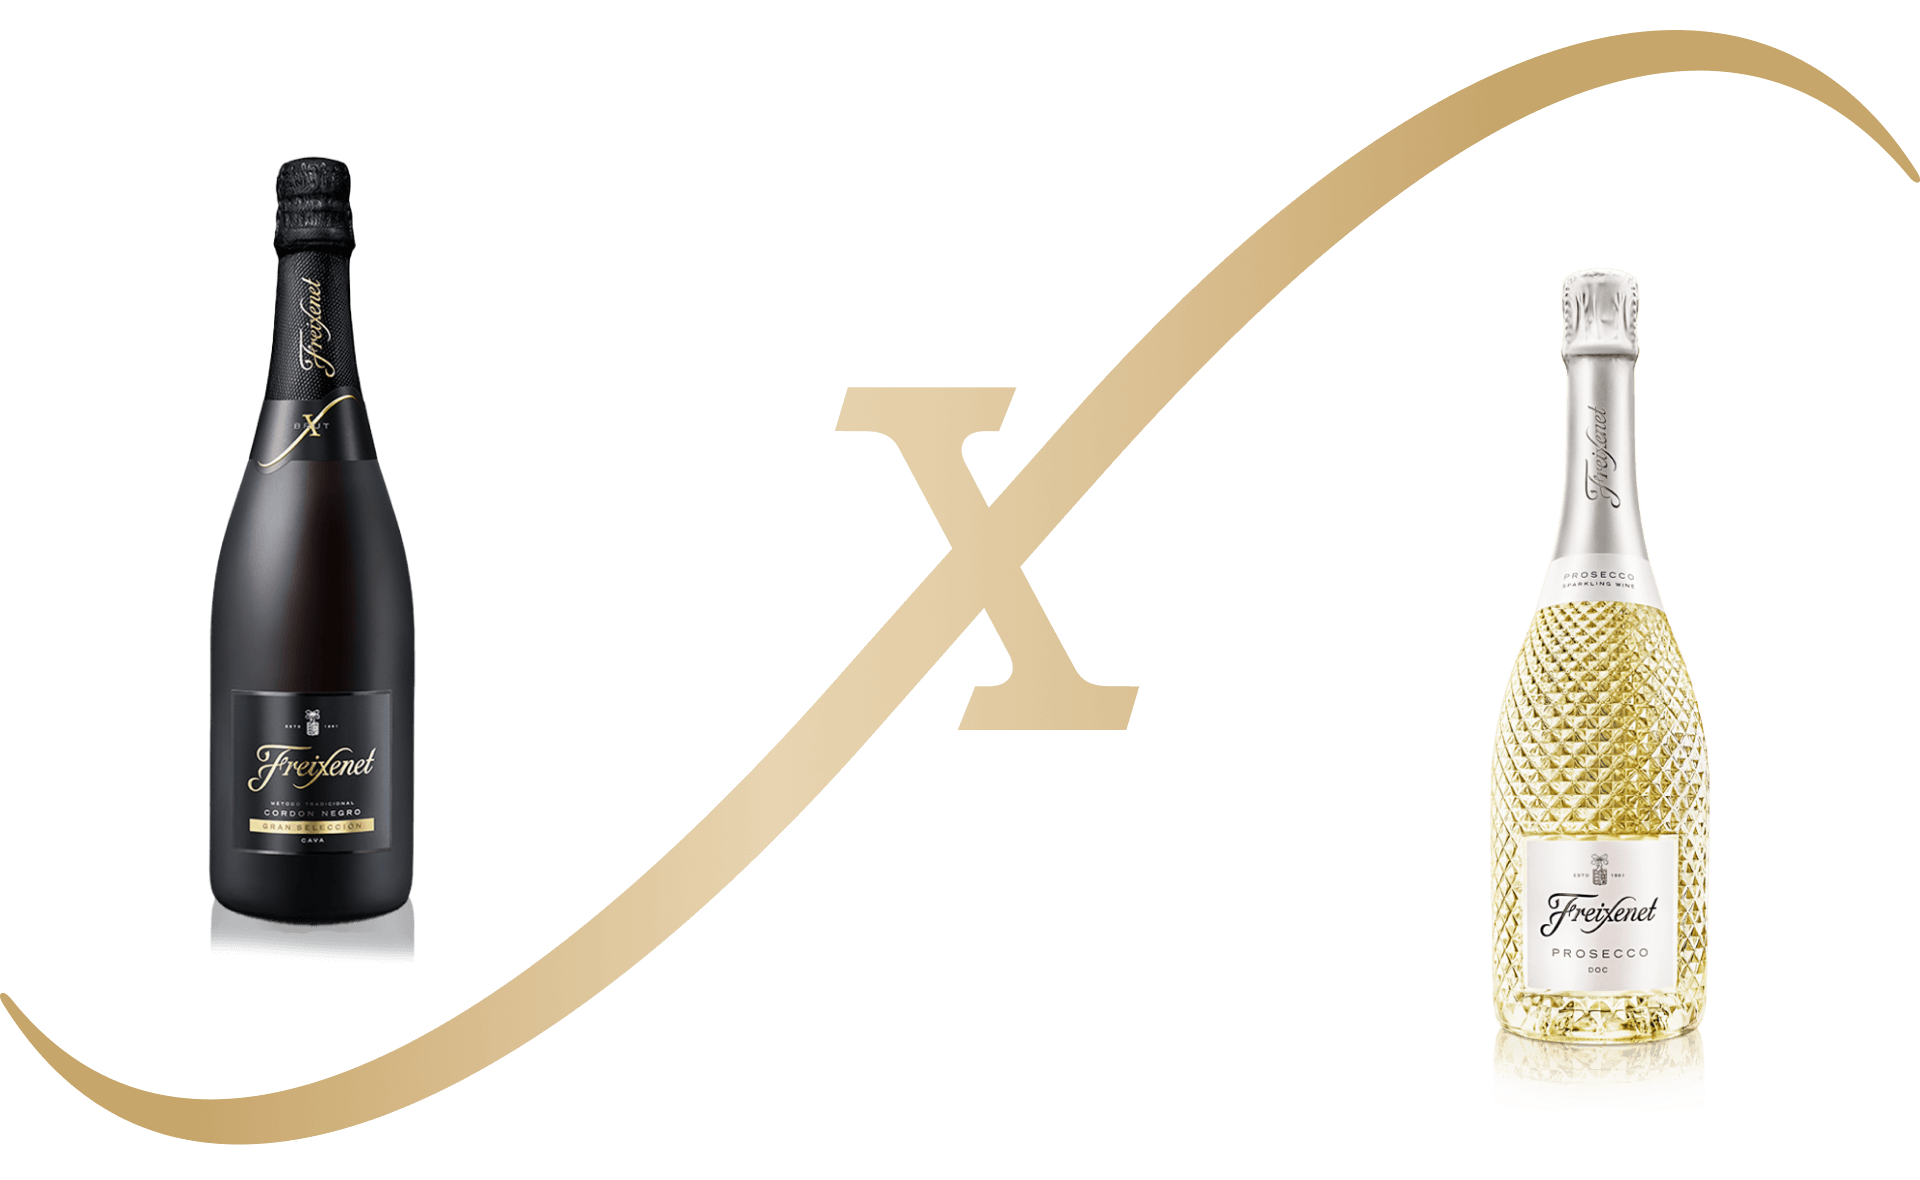 Black Cava bottle and a Transparent faceted Prosecco bottle.